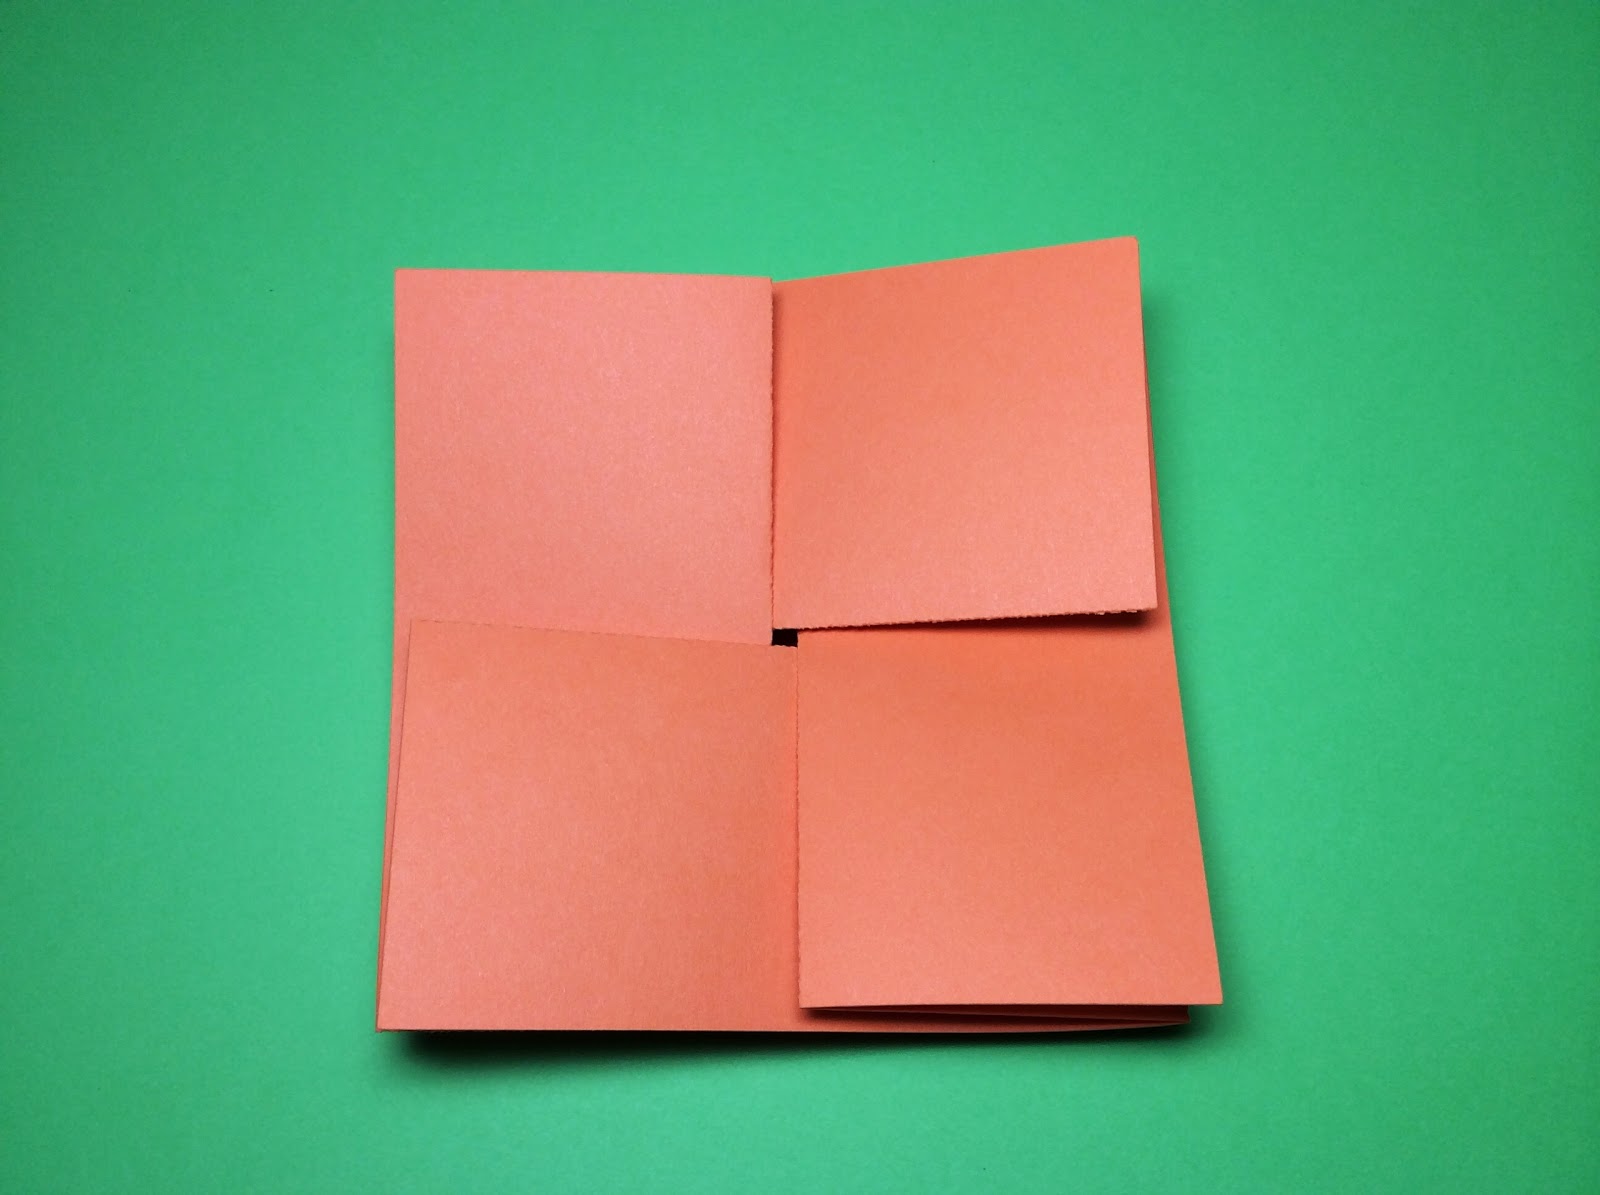 Papercrafts And Other Fun Things An Origami Square Card